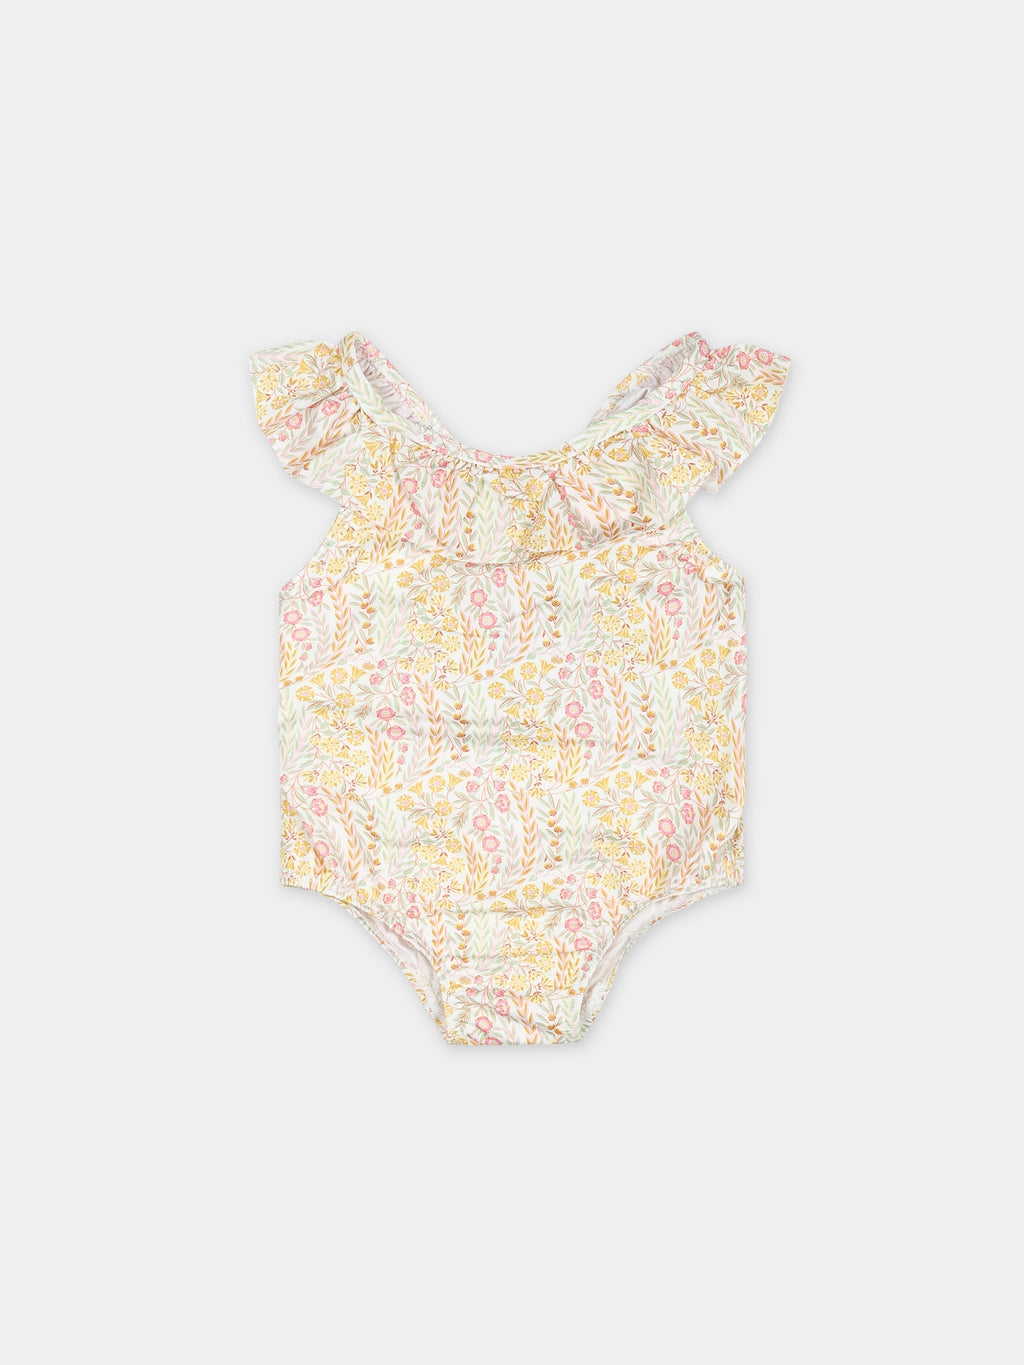 Ivory one-piece swimsuit for baby girl with Liberty fabric